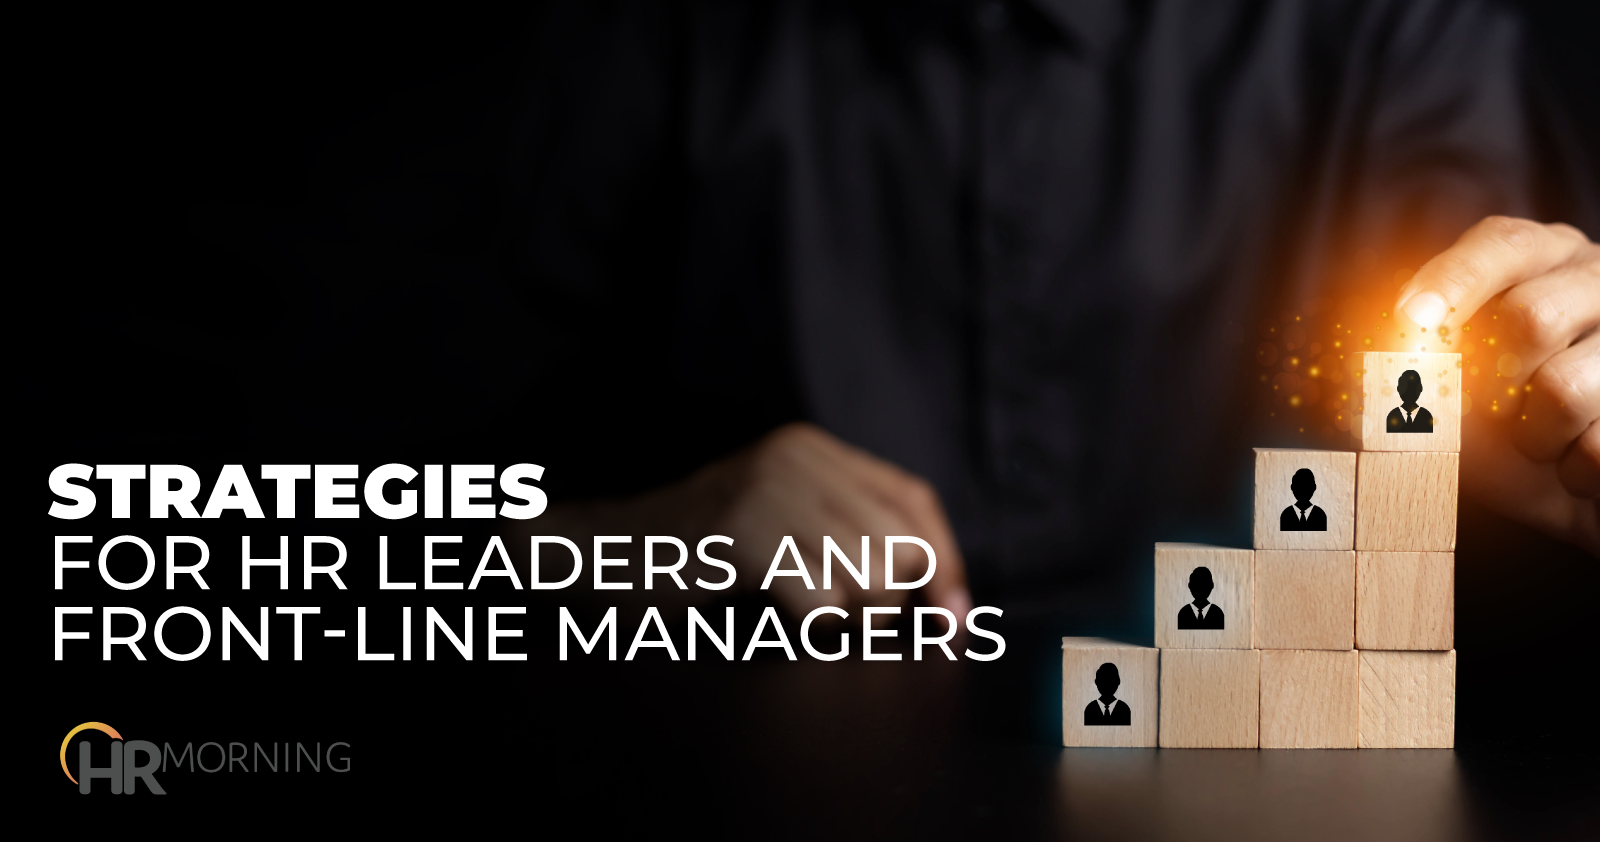 Strategies For HR Leaders And Front-line Managers